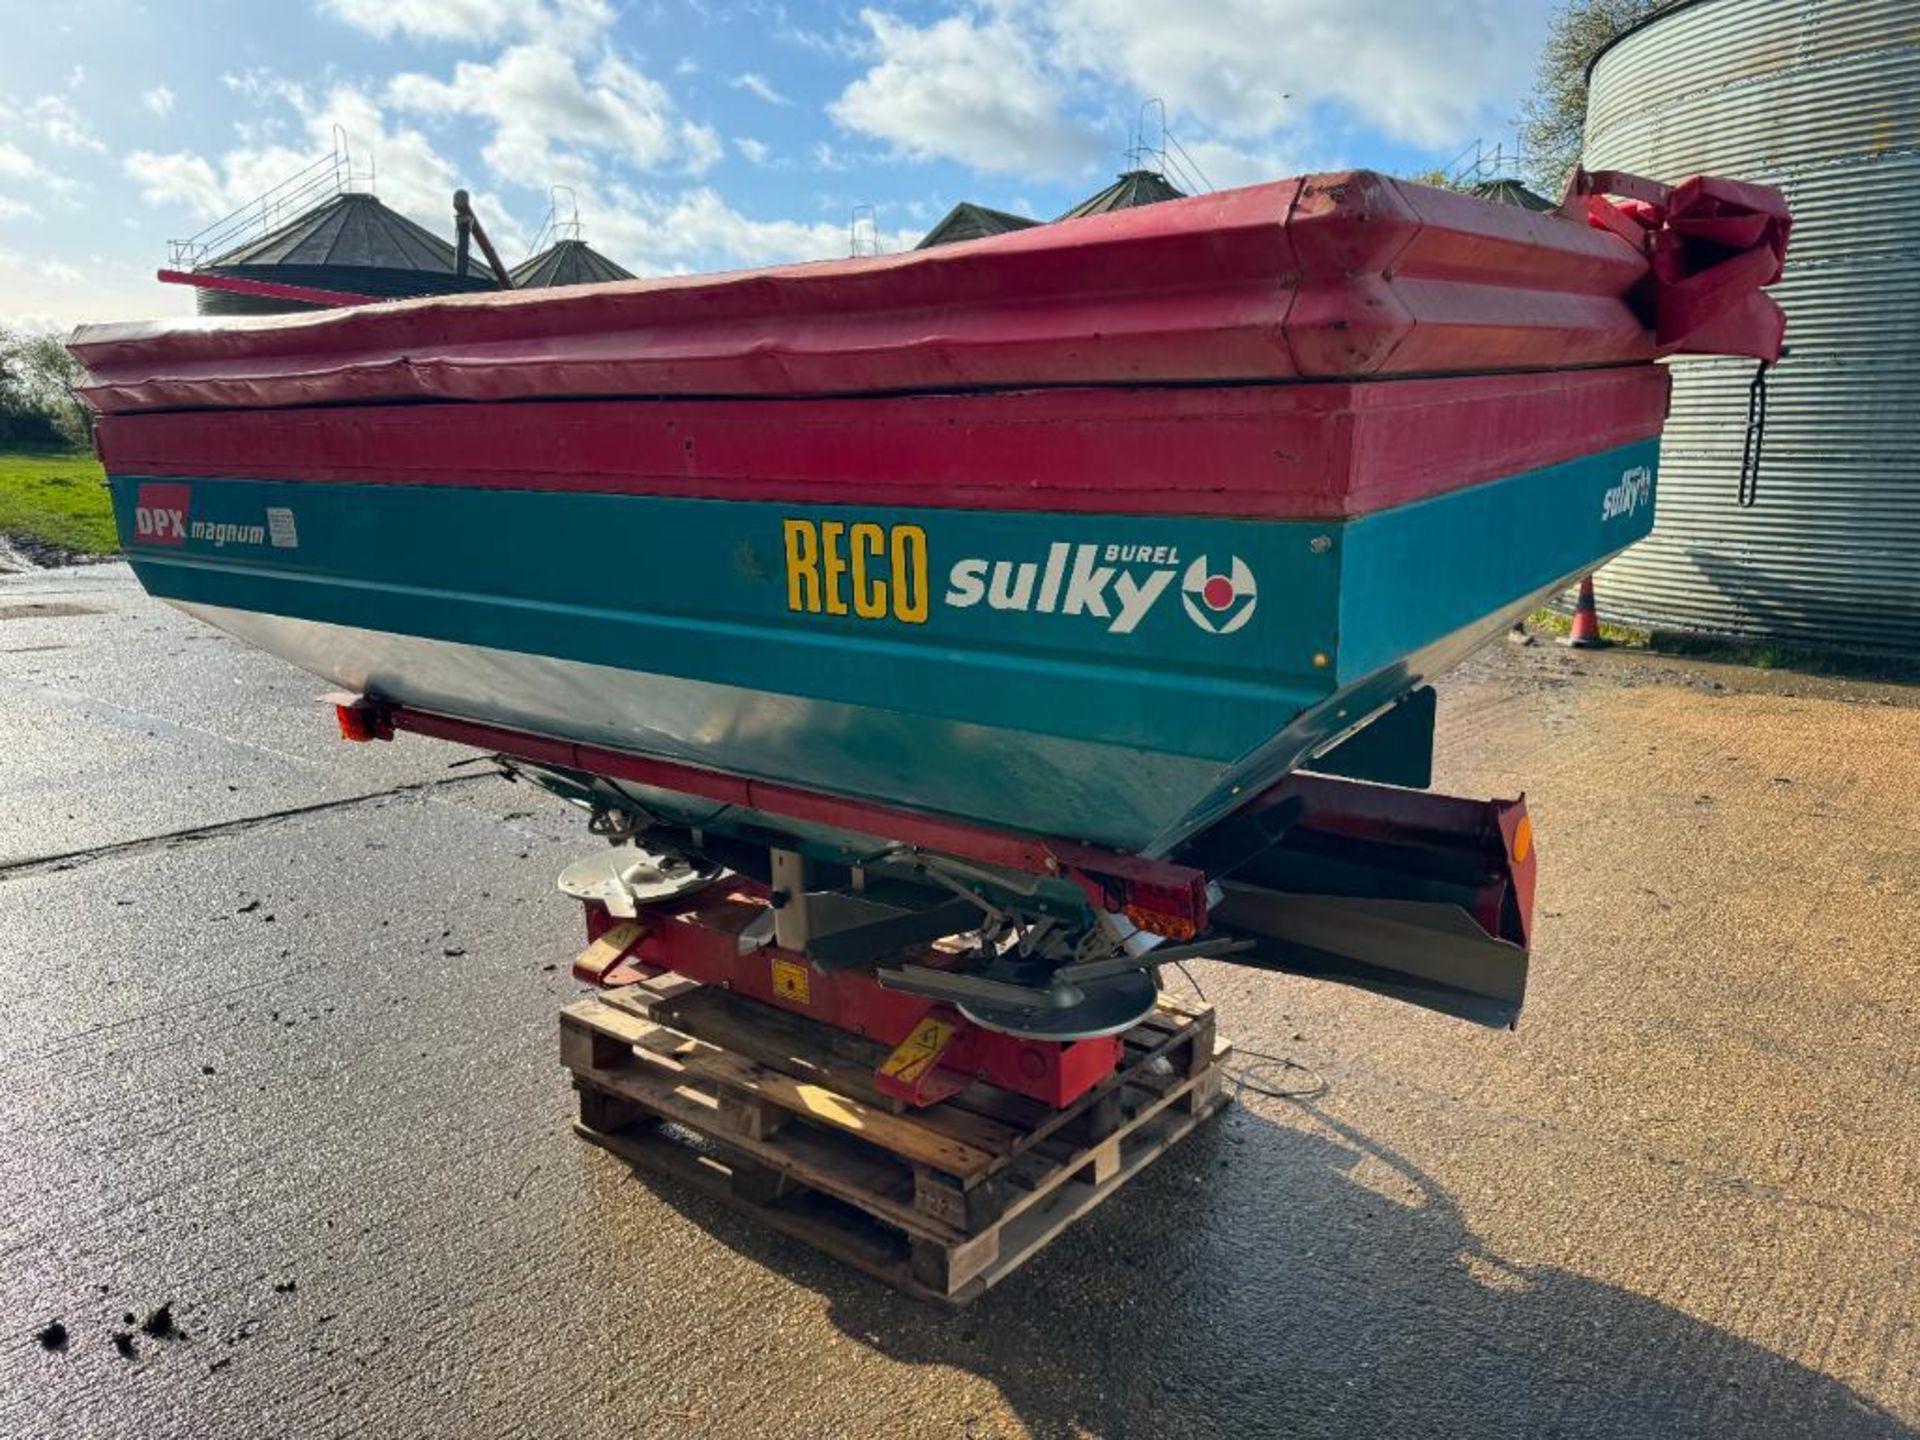 2004 RECO Sulky DPX Magnum 24m twin disc fertiliser spreader. Serial No: 04/MX03 121 - Image 3 of 9